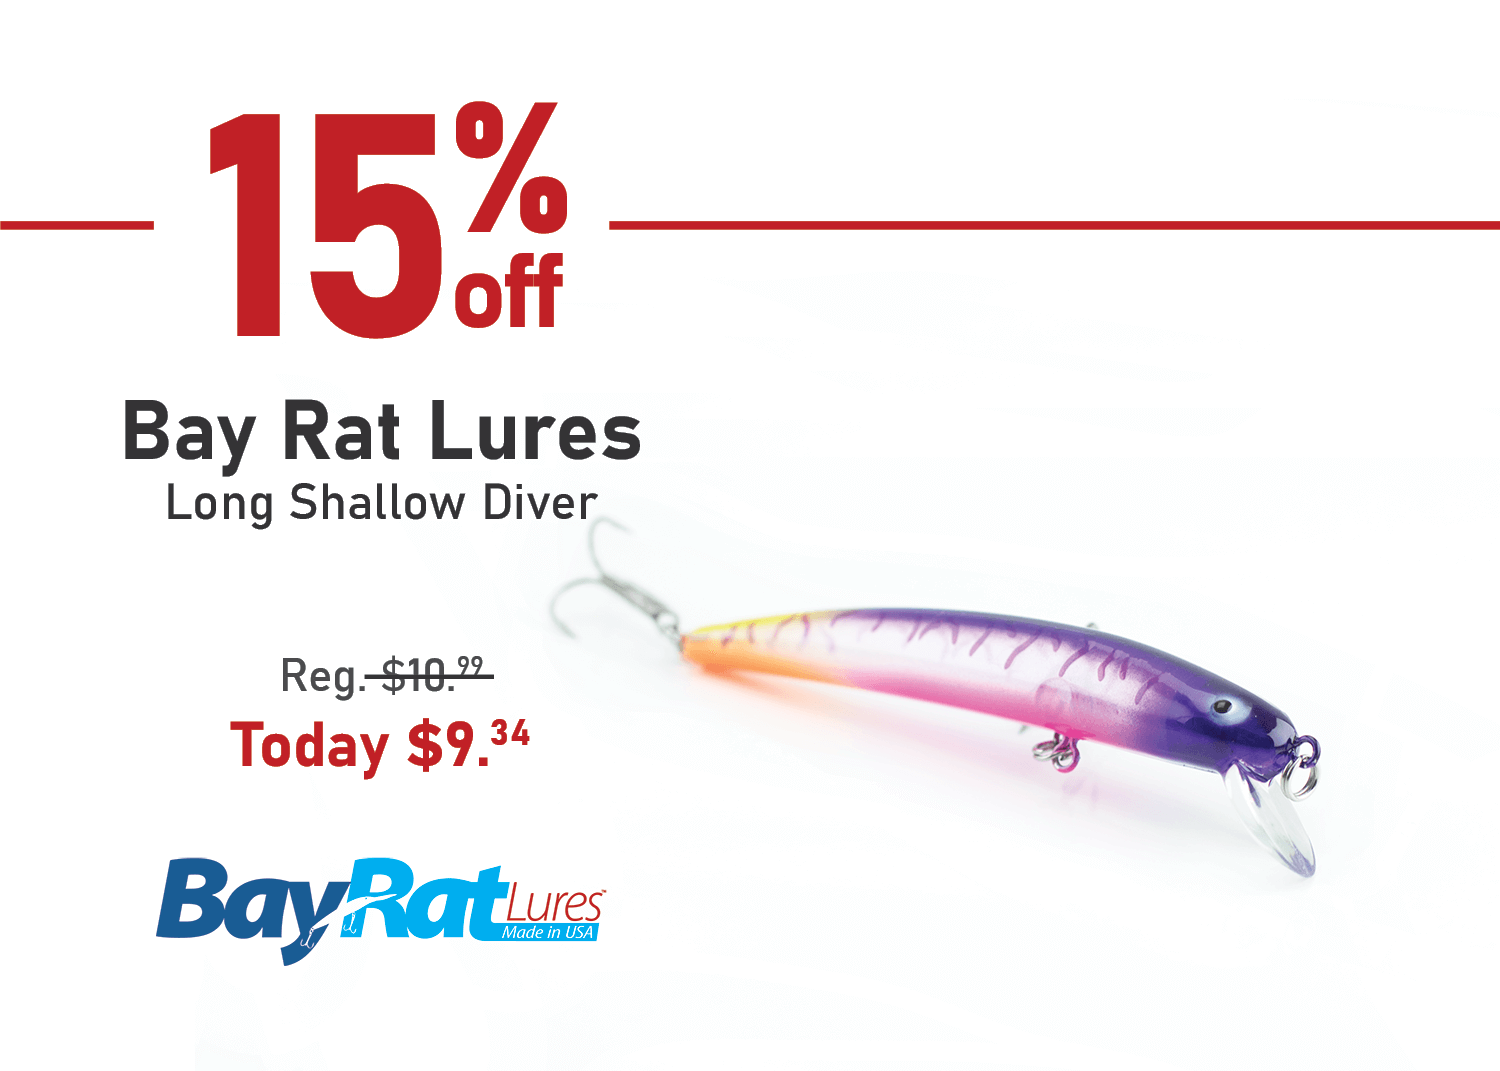 Save 15% on the Bay Rat Lures Long Shallow Diver